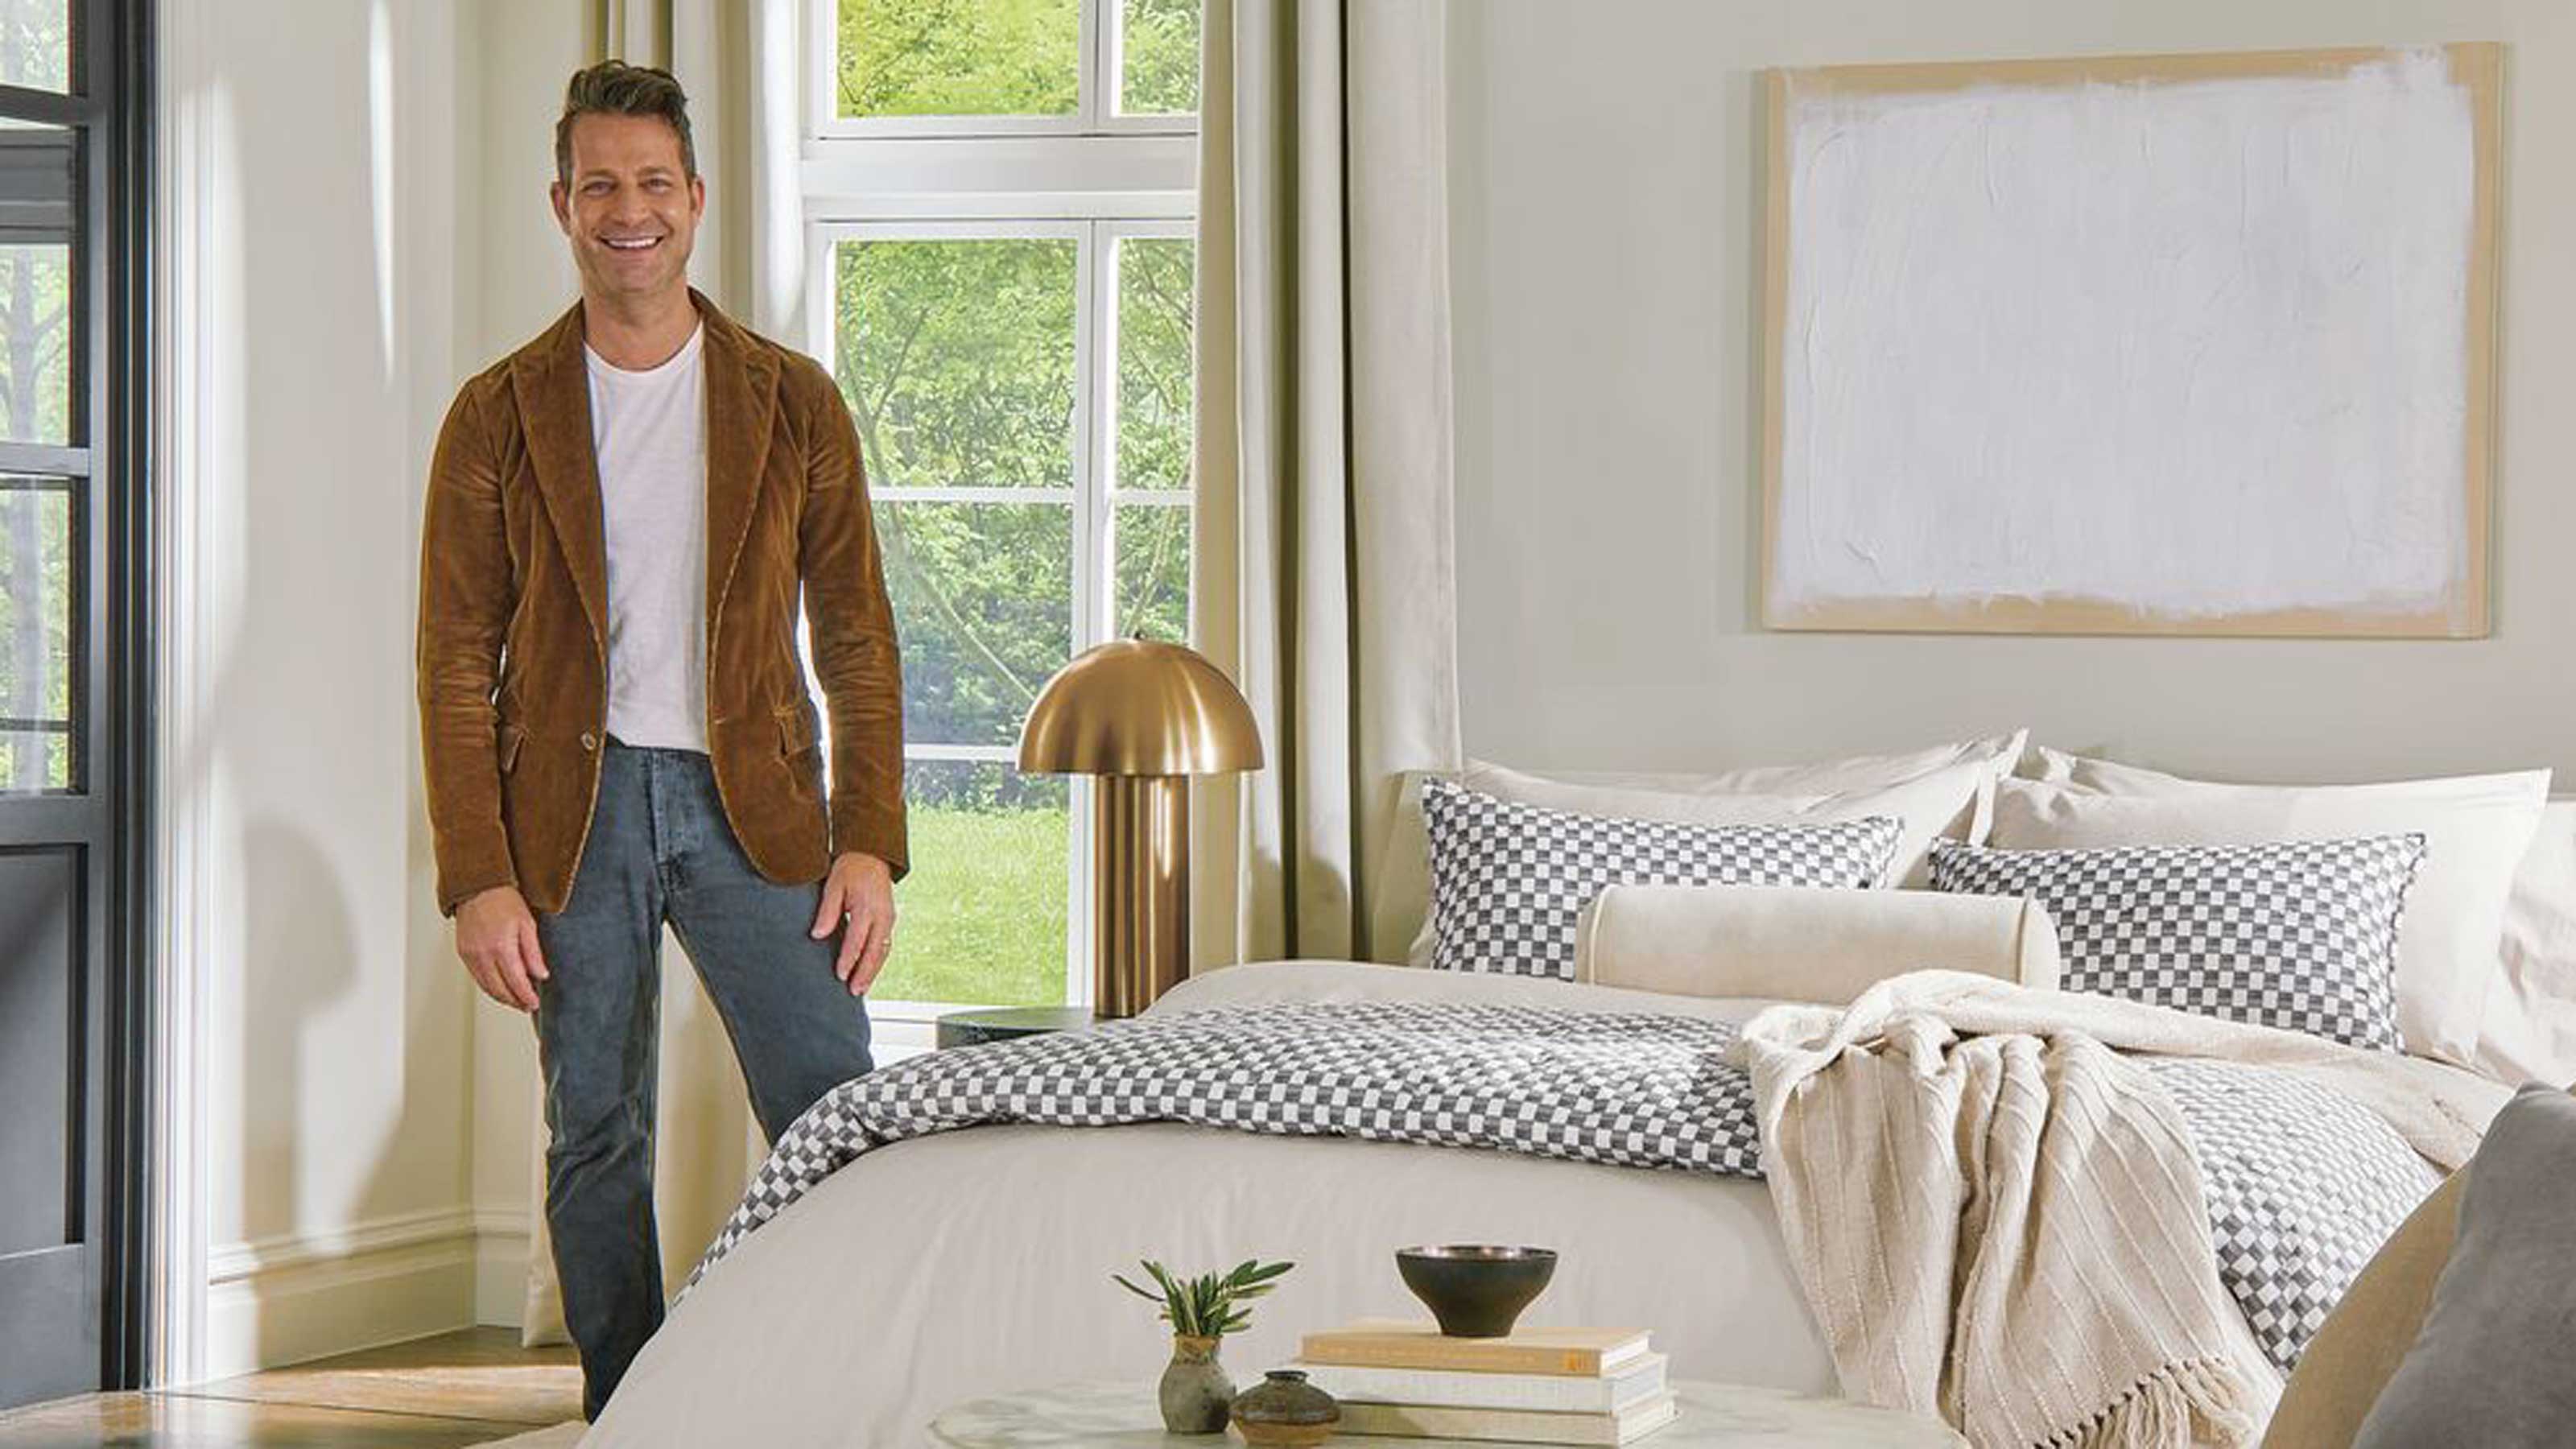 What We're Loving From Nate Berkus' Latest Collection for Target